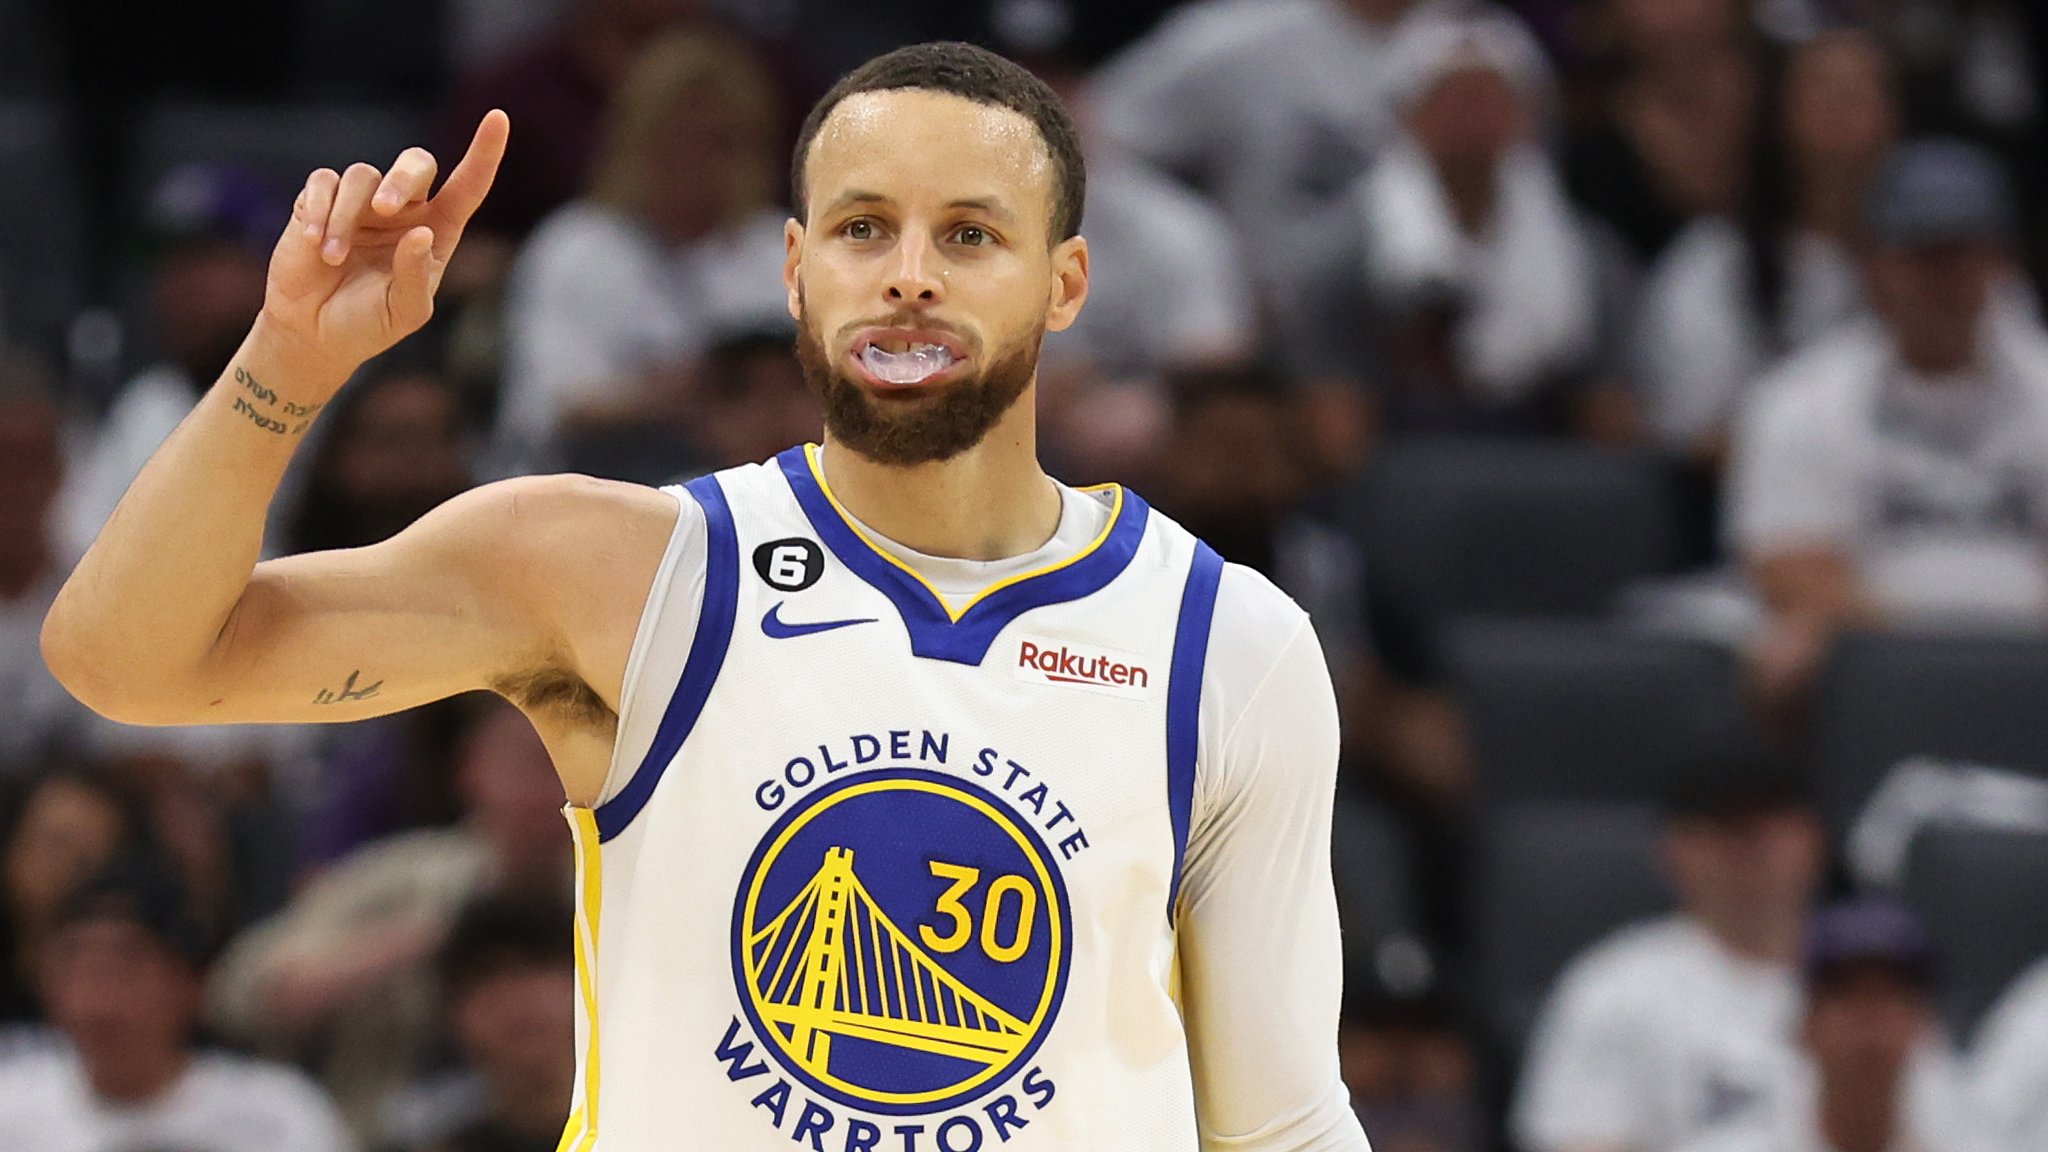 NBA: Stephen Curry top-scores for Golden State Warriors in overtime win -  BBC Sport